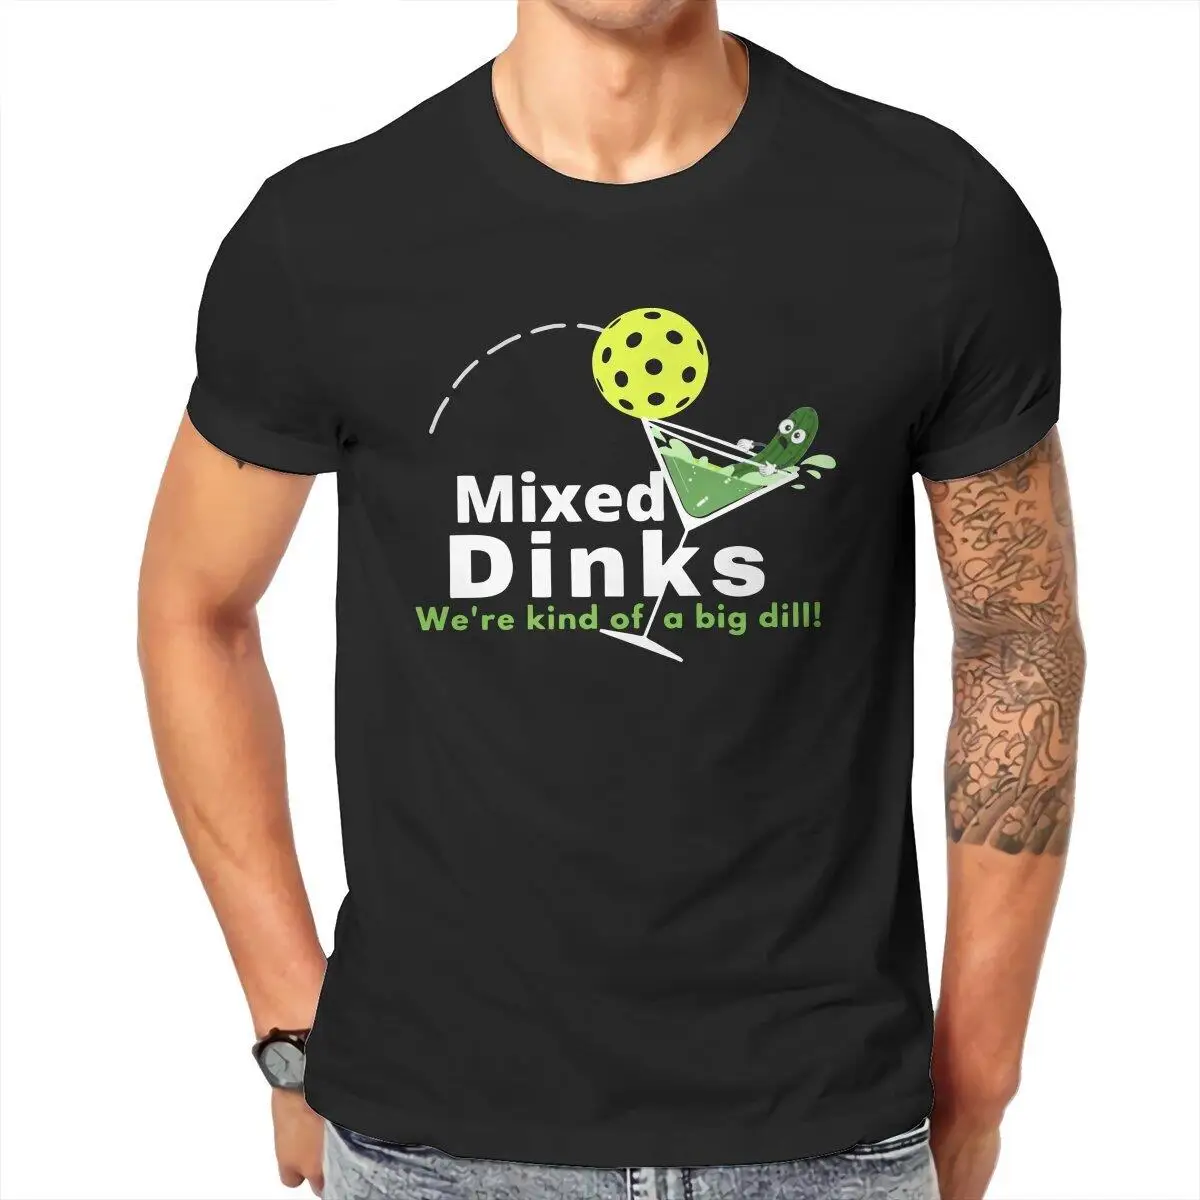 Men's Mixed Dinks Pickleball Martini  T Shirts  100% Cotton Clothing Novelty Short Sleeve Crewneck Tees New Arrival T-Shirts